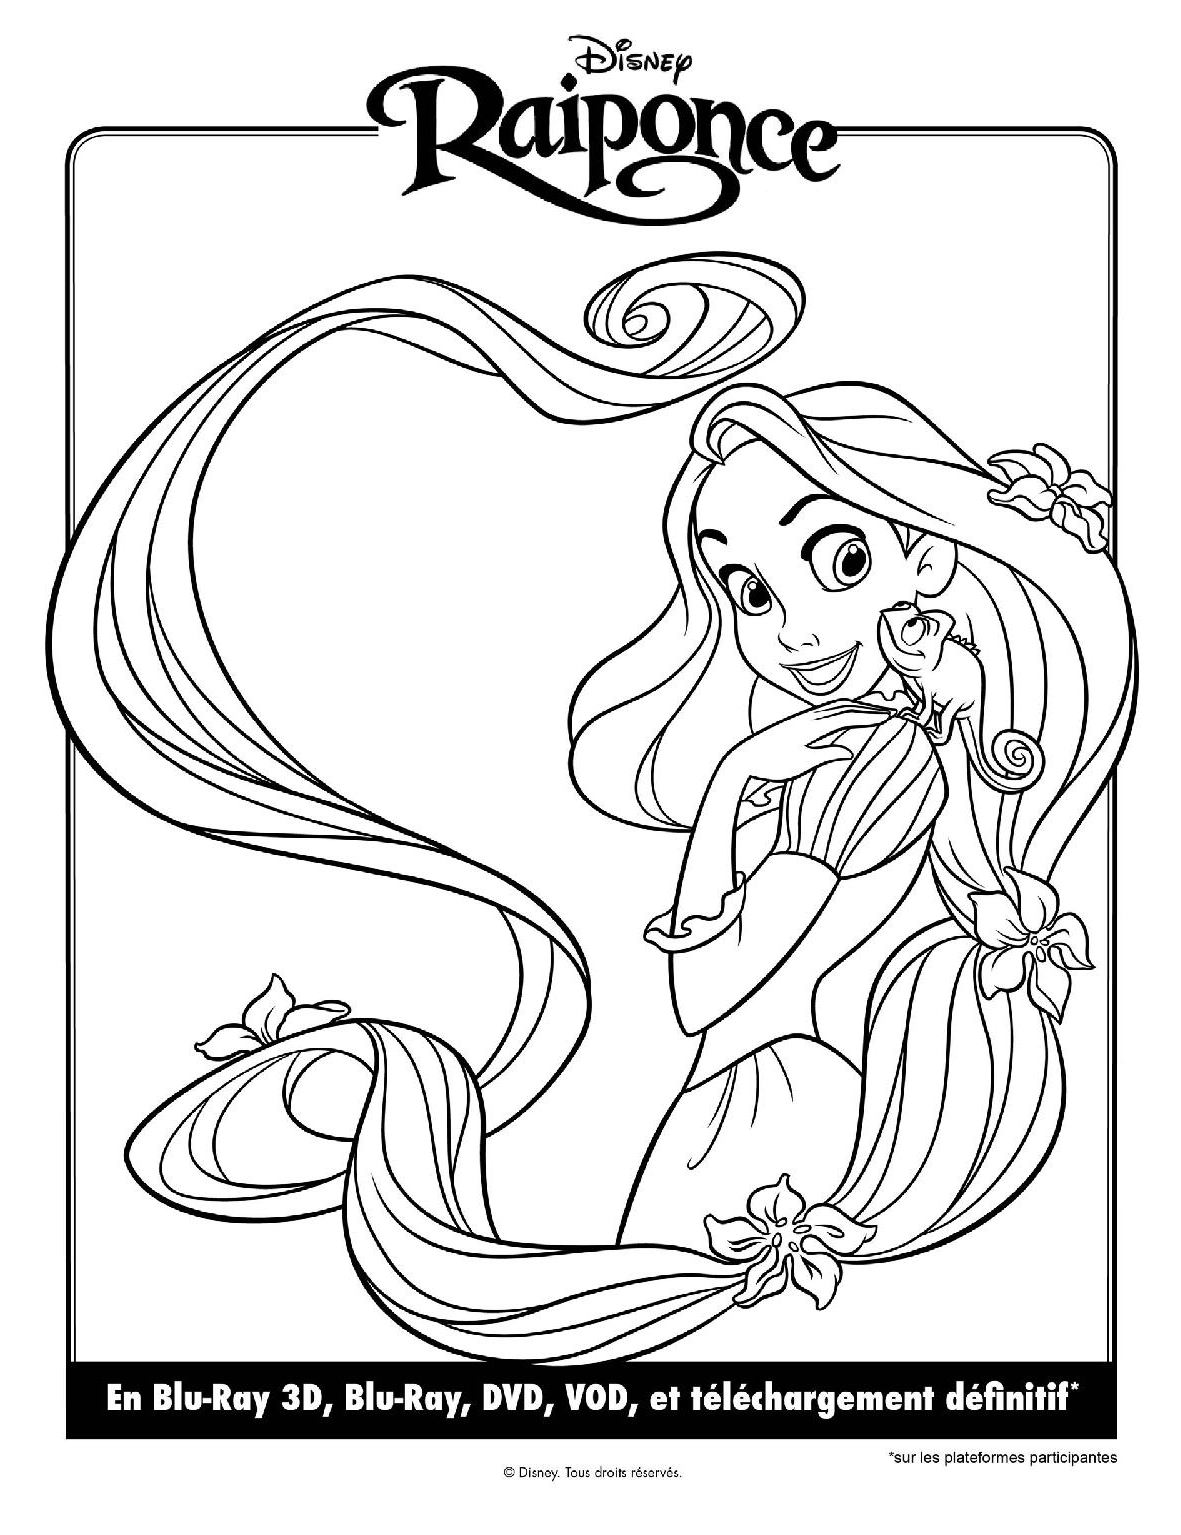 Free Tangled coloring page to print and color, for kids : Rapunzel and her long hair